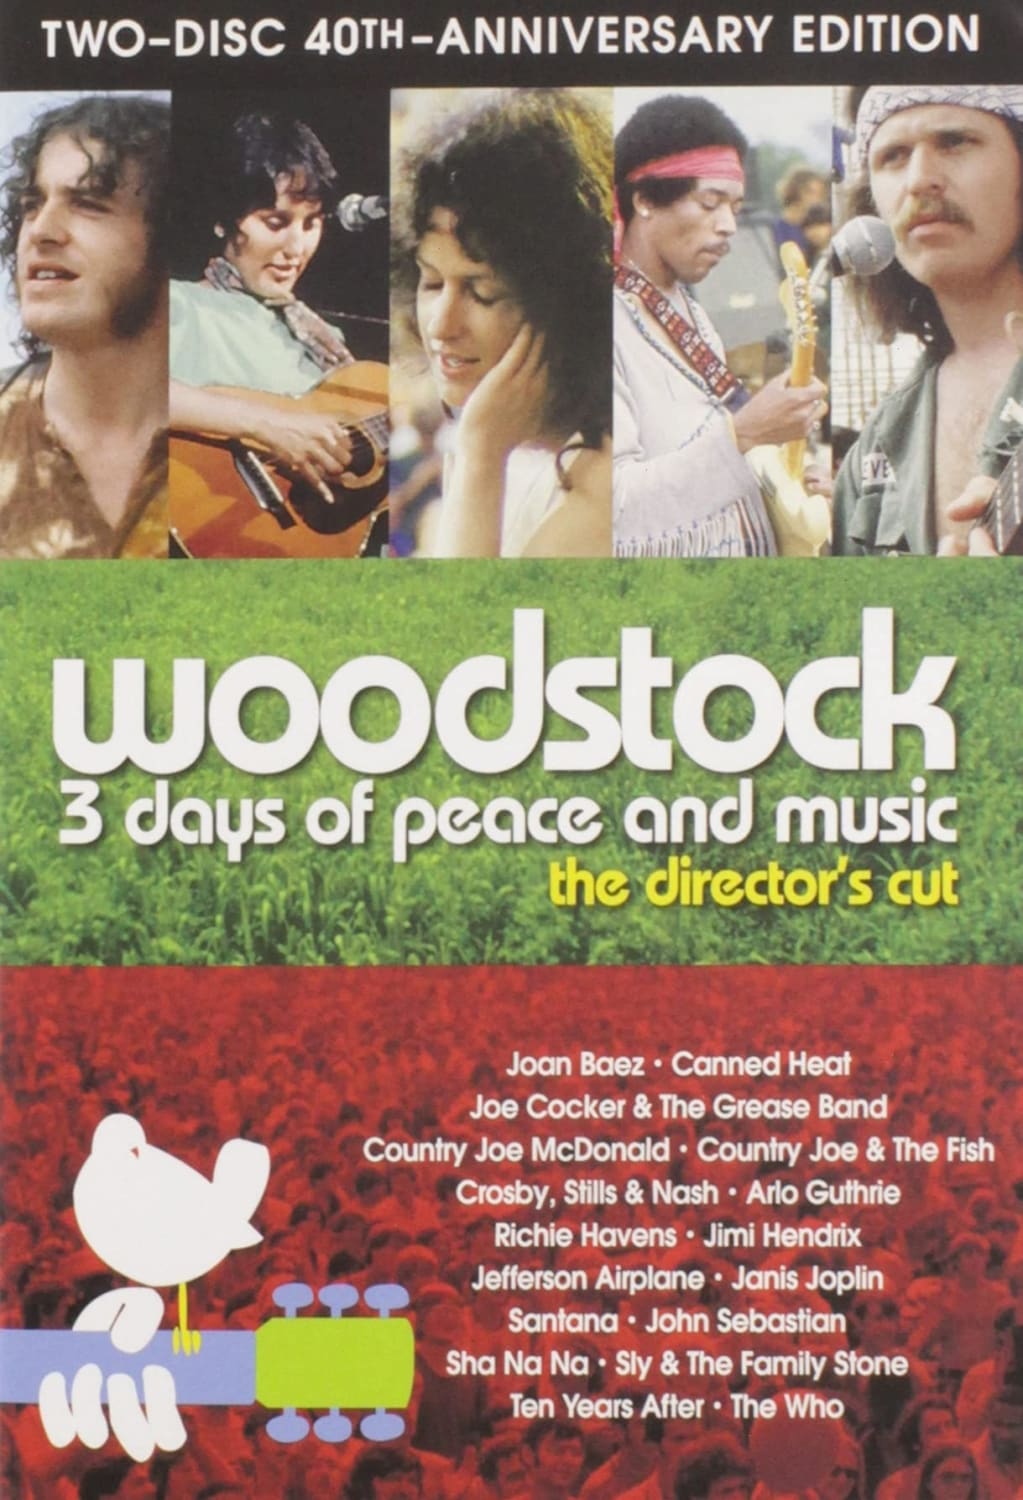 Woodstock: 3 Days of Peace & Music Director’s Cut (40th Anniversary Two-Disc Special Edition) (DVD) on MovieShack